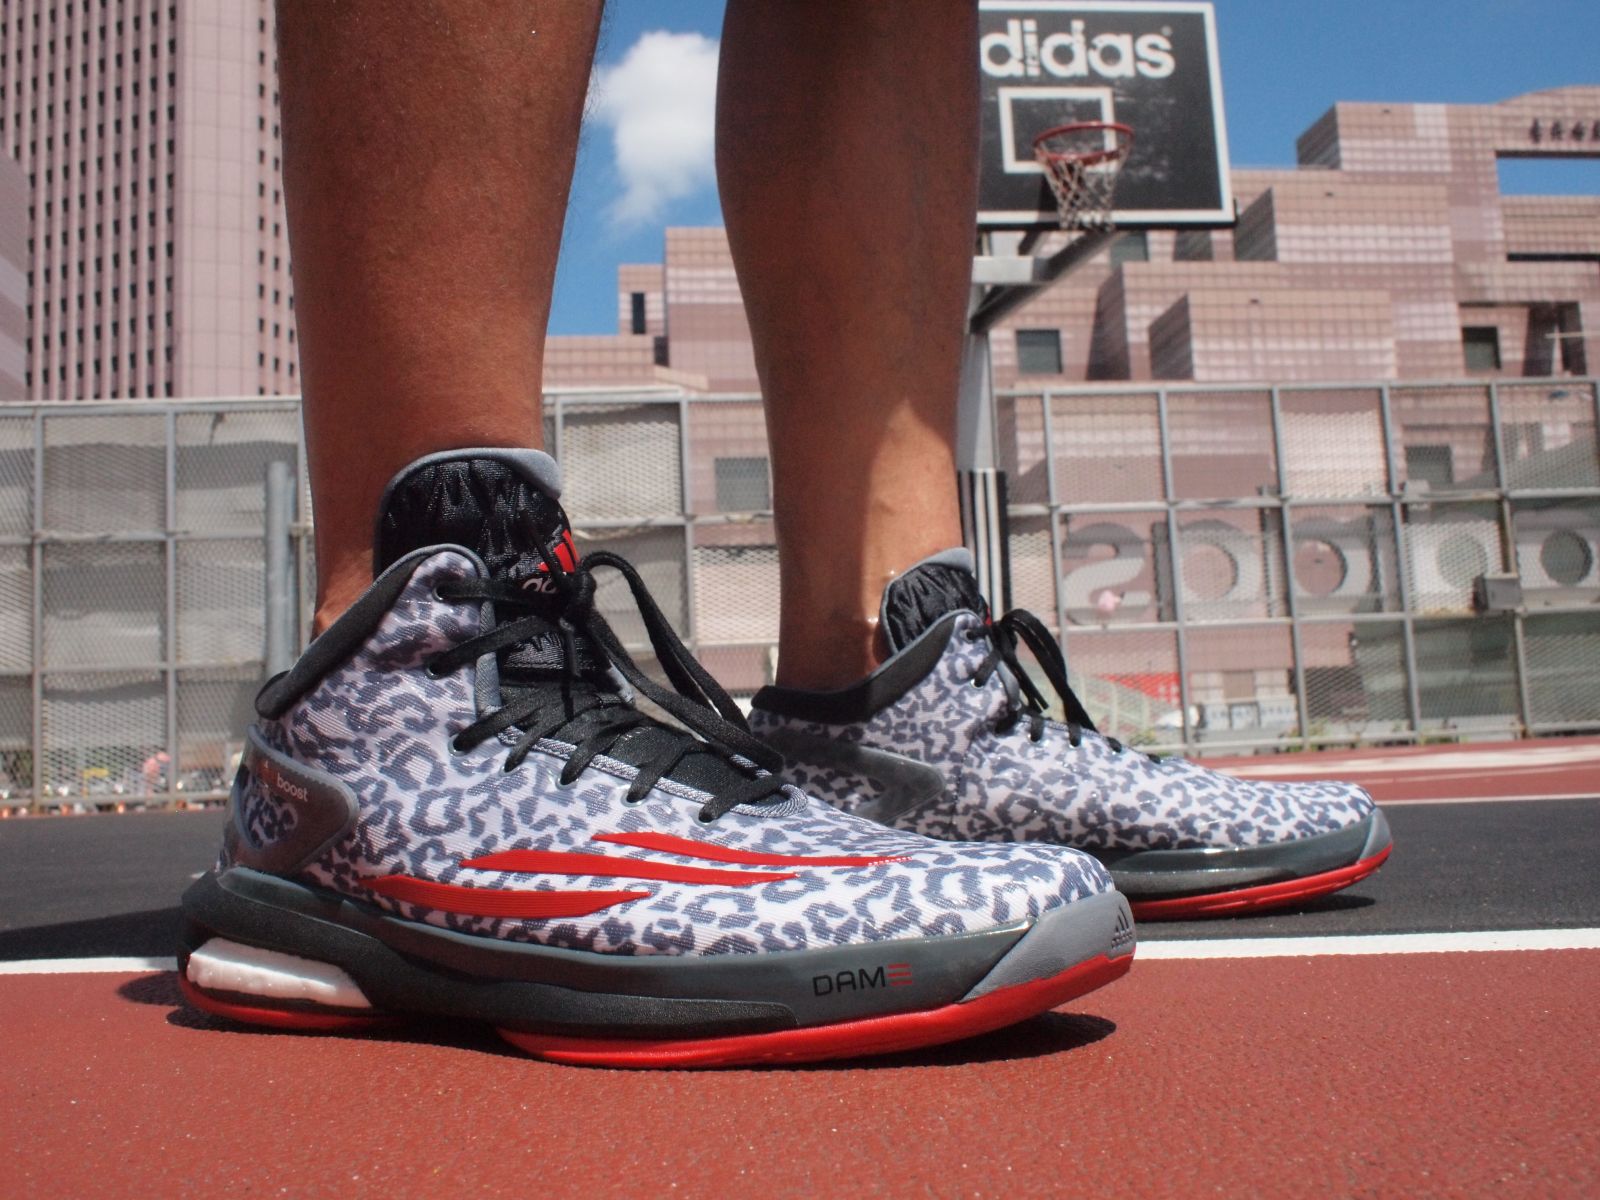 adidas crazylight boost review